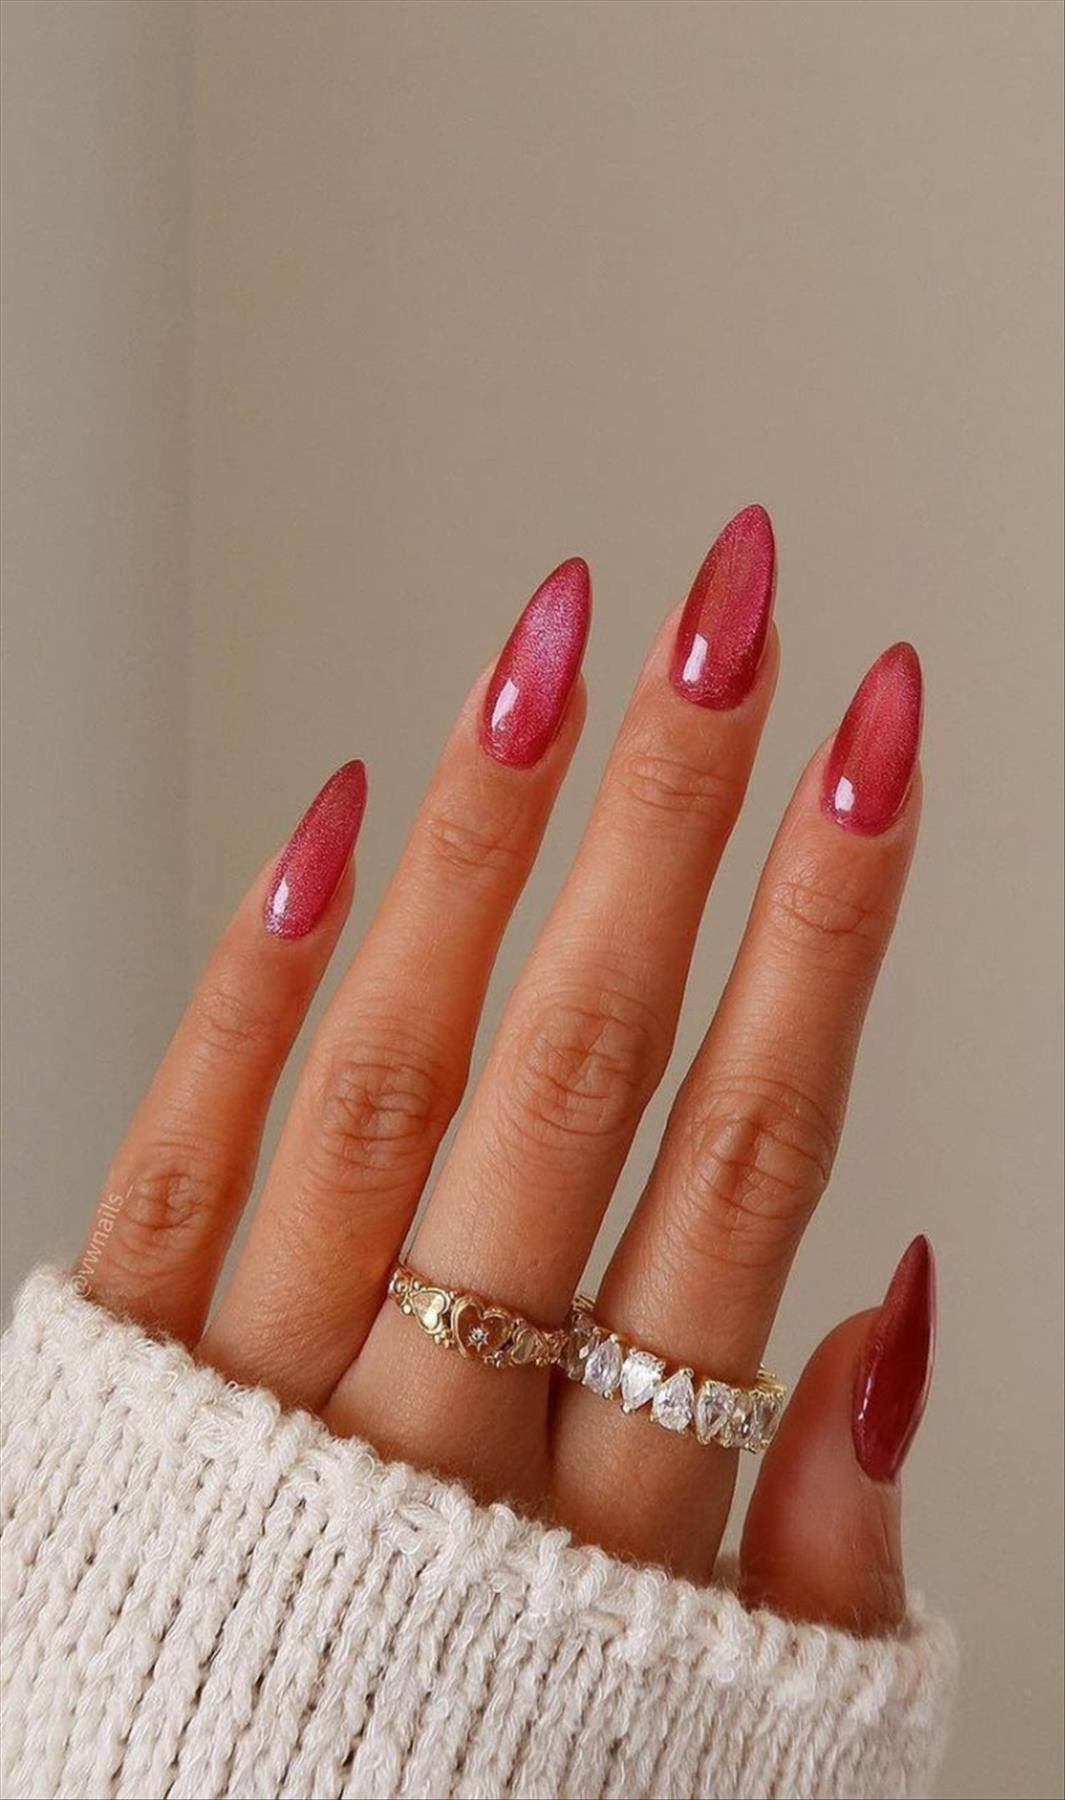 Best New Year's Nails To Rock in 2023